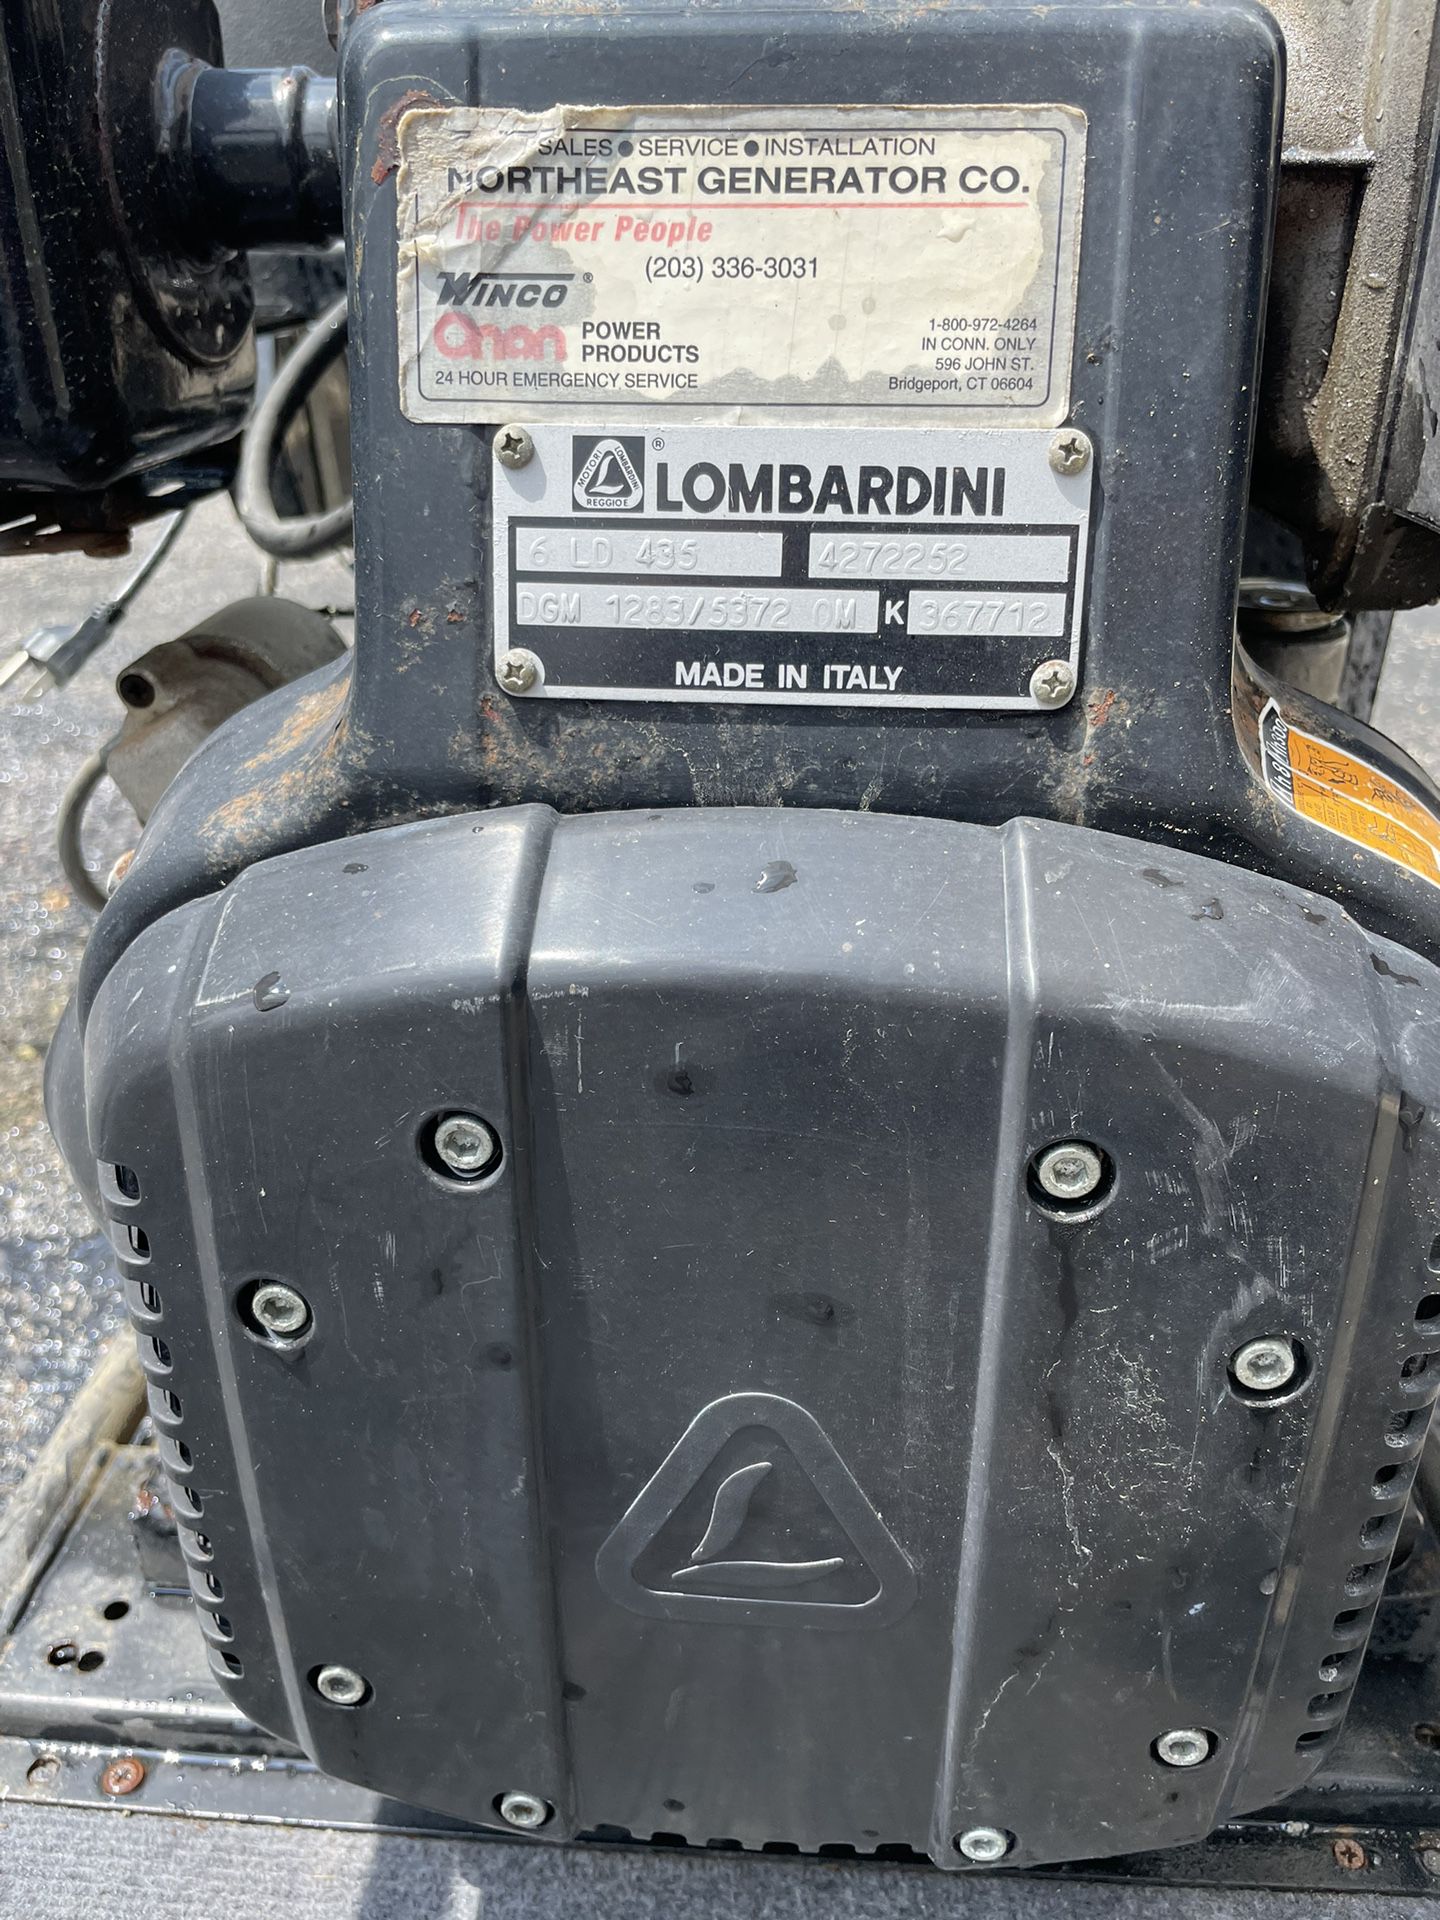 Alton AT04141 1300w Generator for Sale in Snohomish, WA - OfferUp